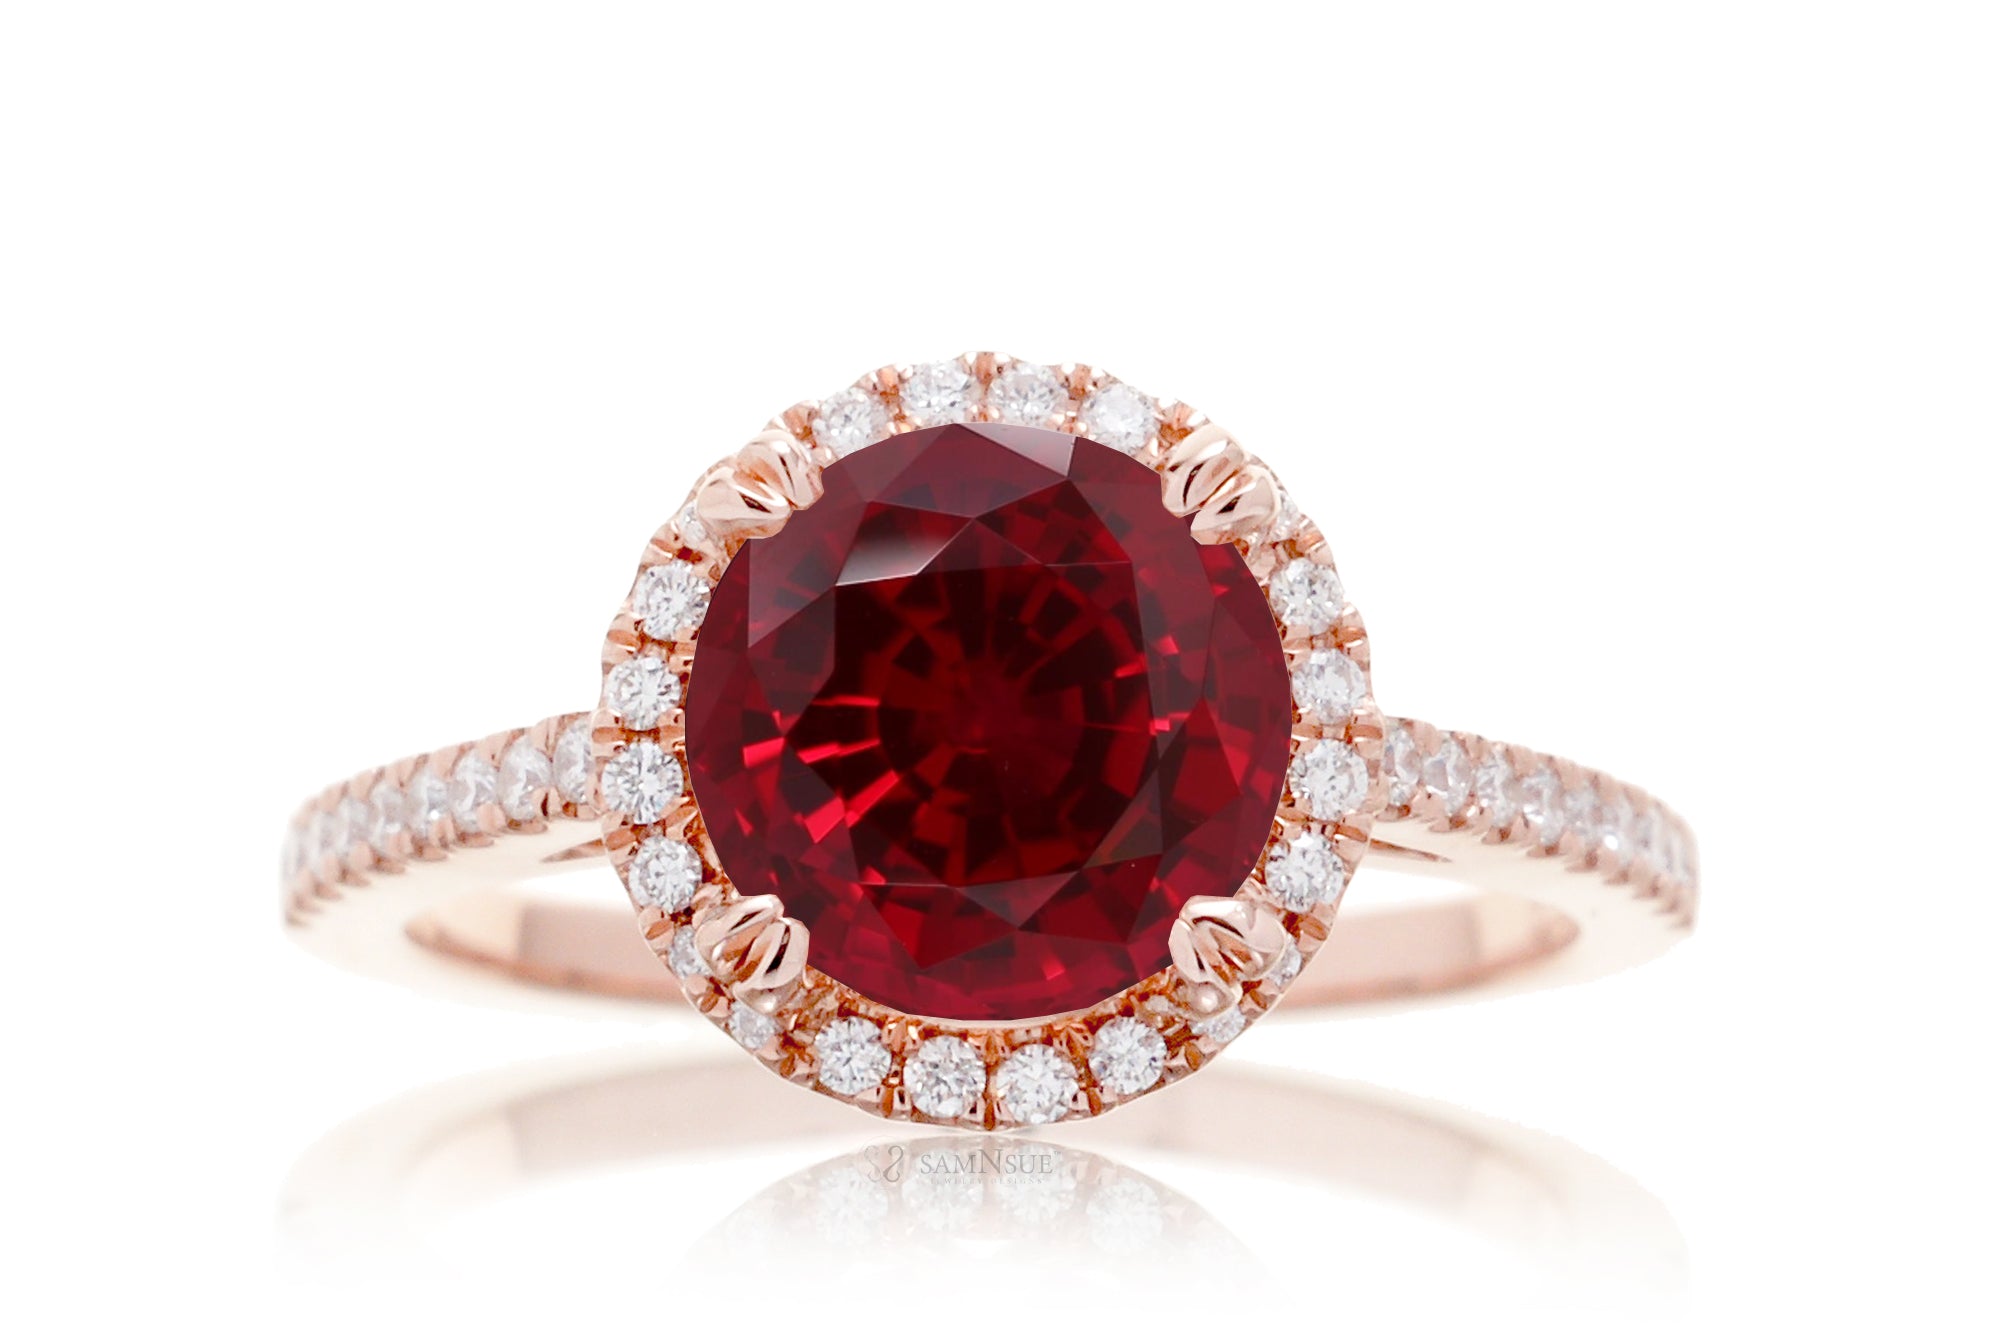 The Signature Round Lab-Grown Ruby